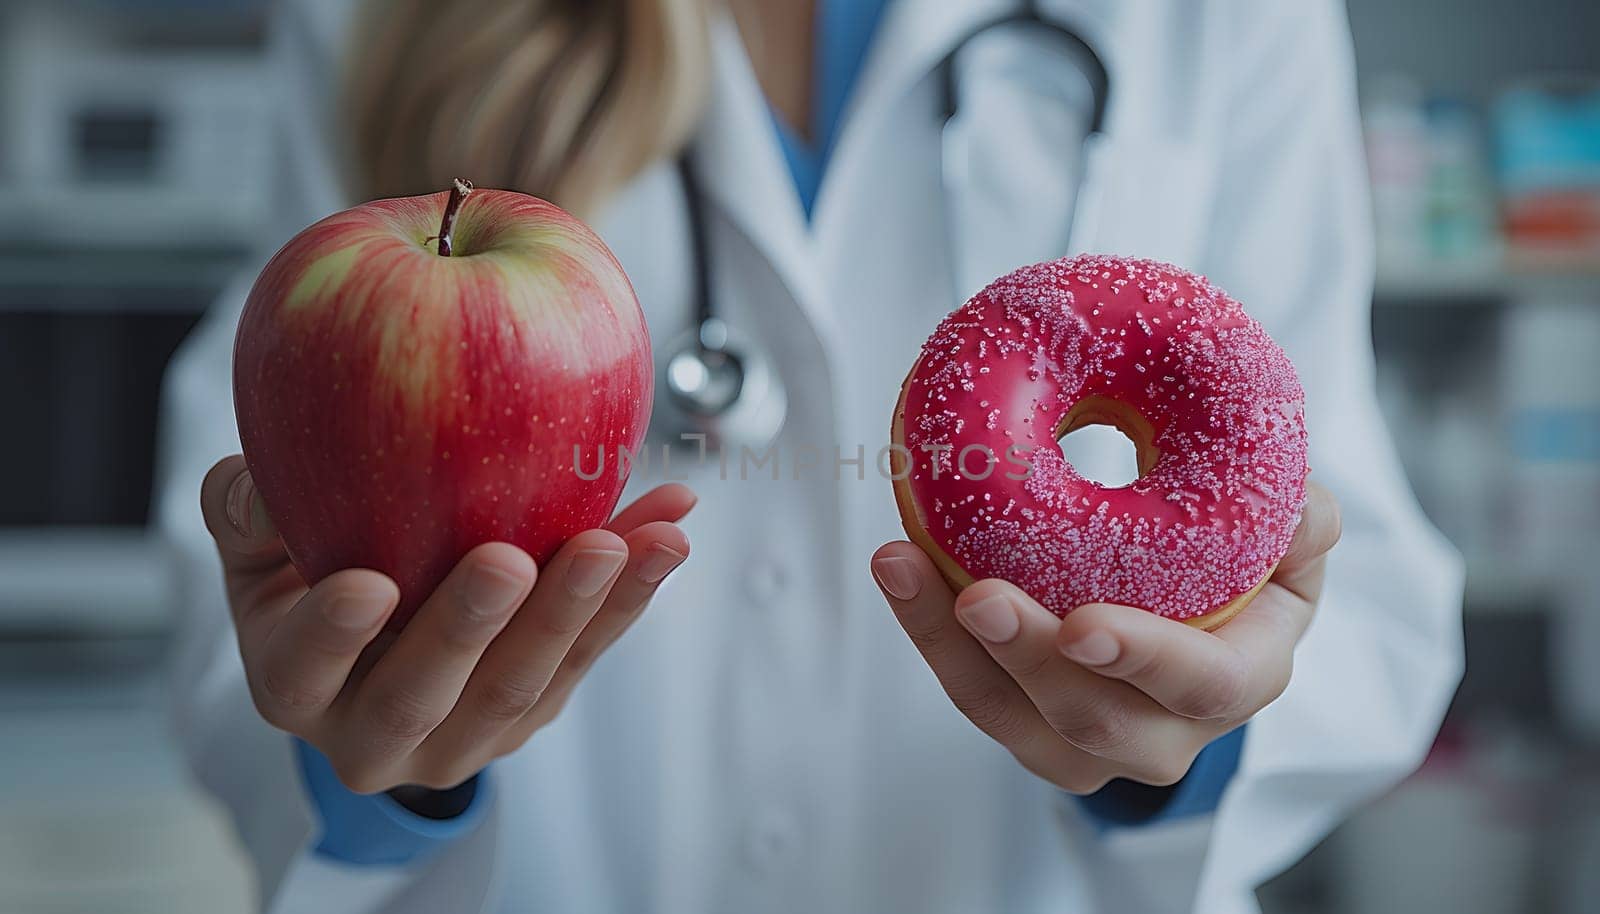 Doctor holding natural foods an apple and a donut by Nadtochiy